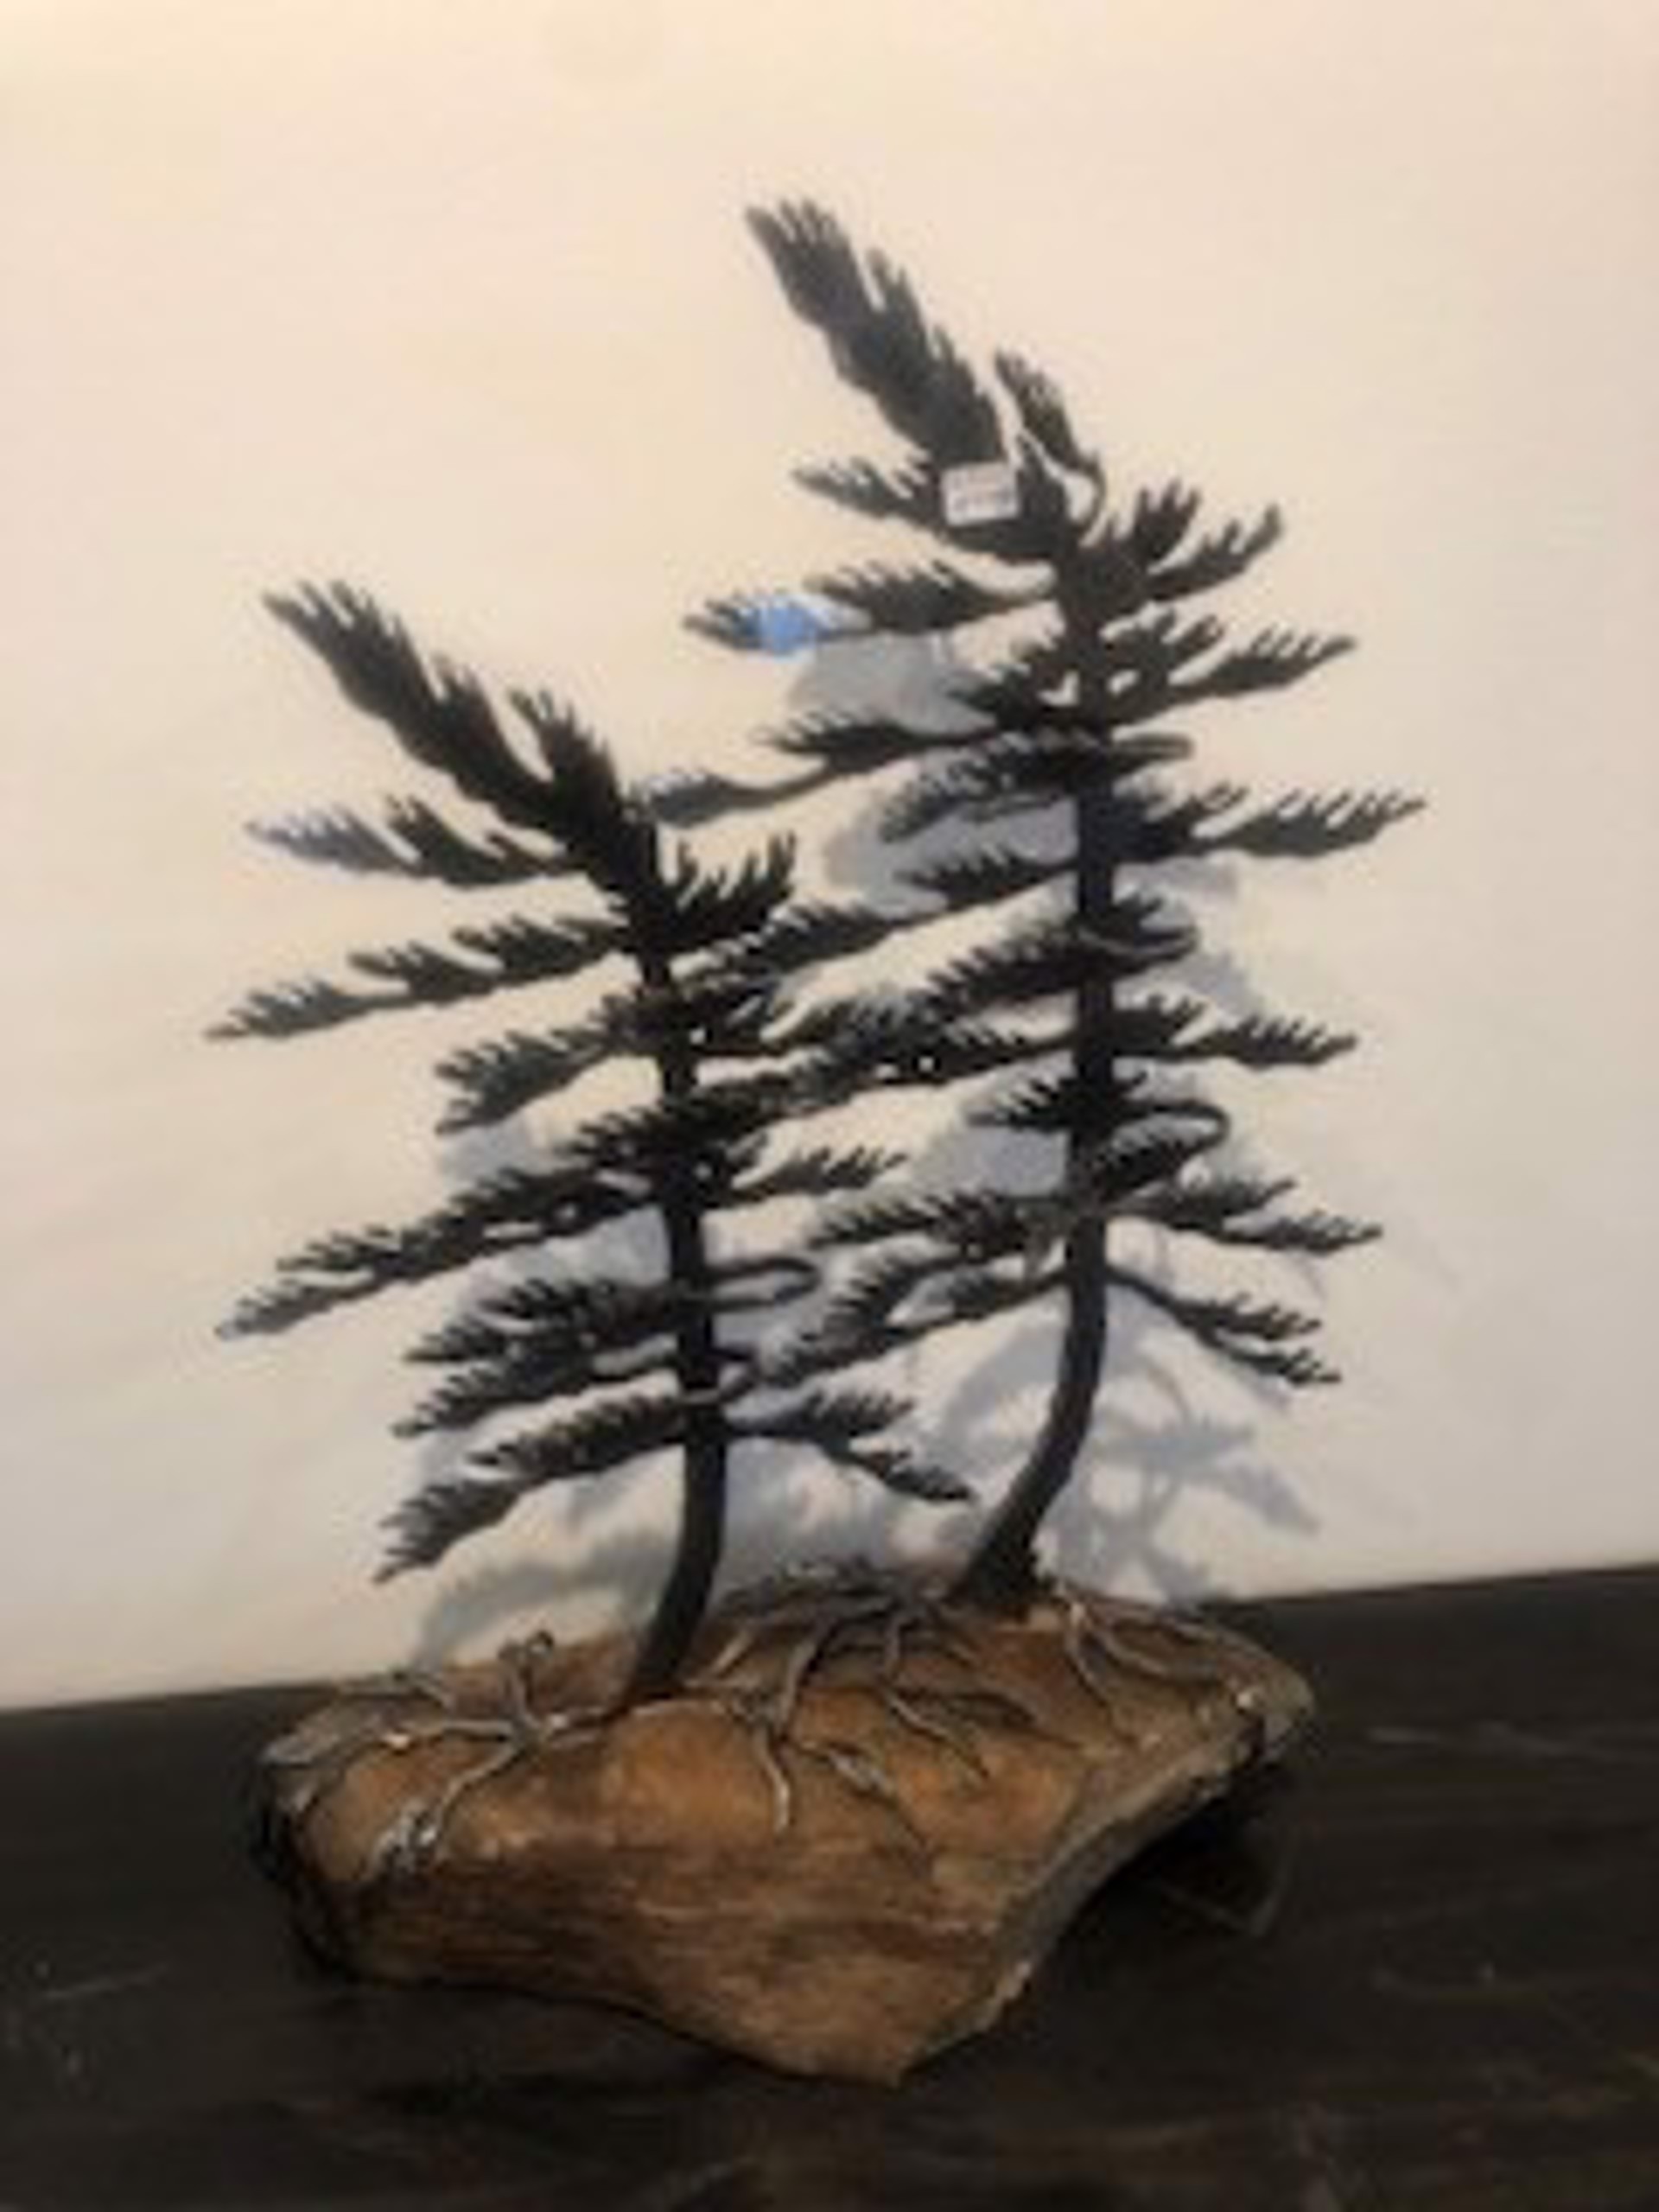 Two Windswept Pines on a Rock - #6302 by Cathy Mark